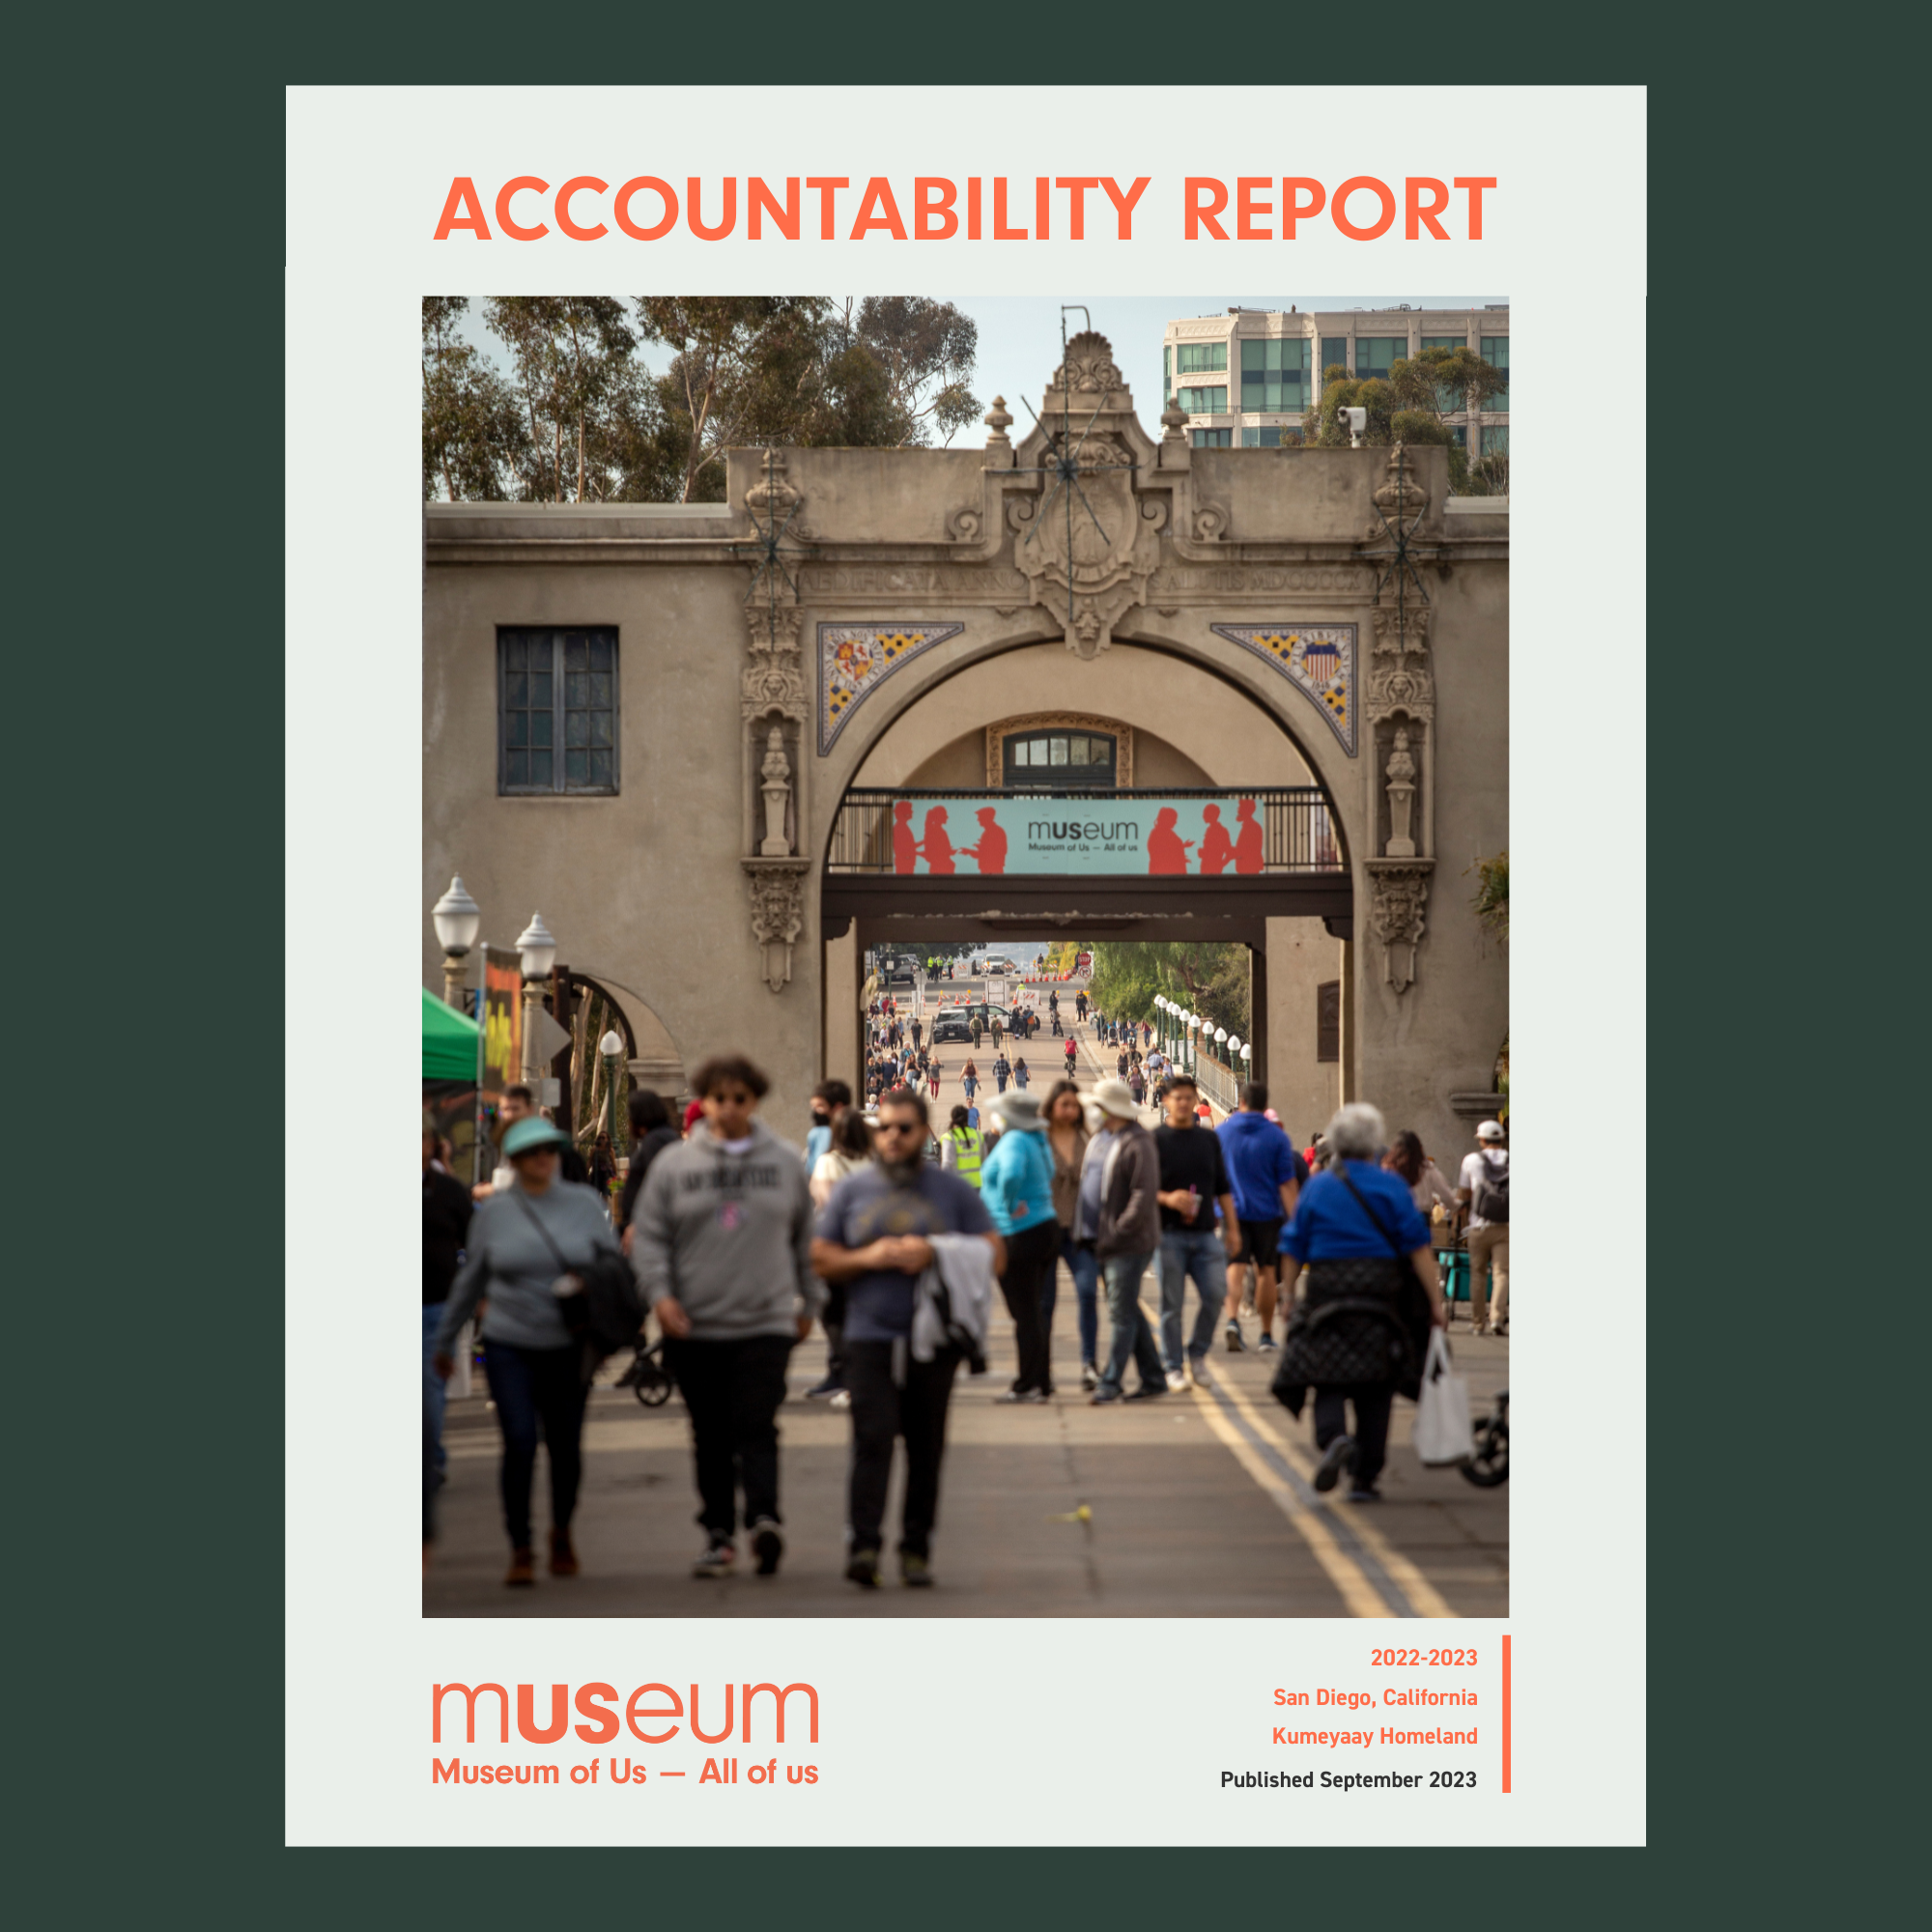 Cover of the 2022-2023 Accountability Report featuring an image of visitors walking in front of the Museum building.